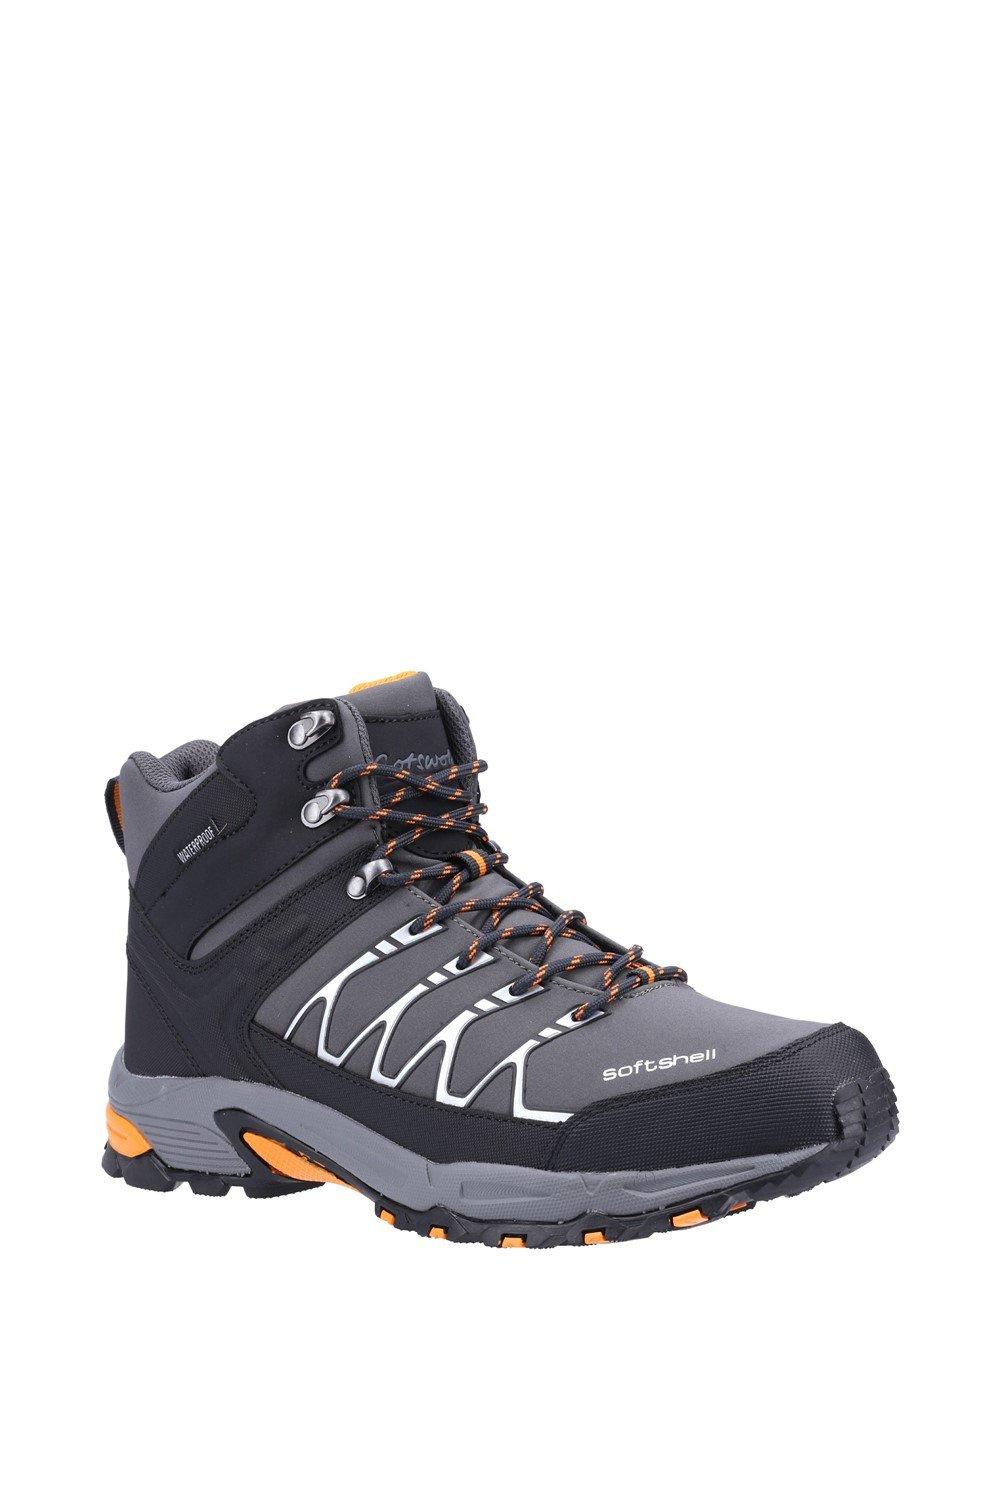 Cotswold Abbeydale Mid Black/Grey Mens Hiking Boots Softshell and PU 